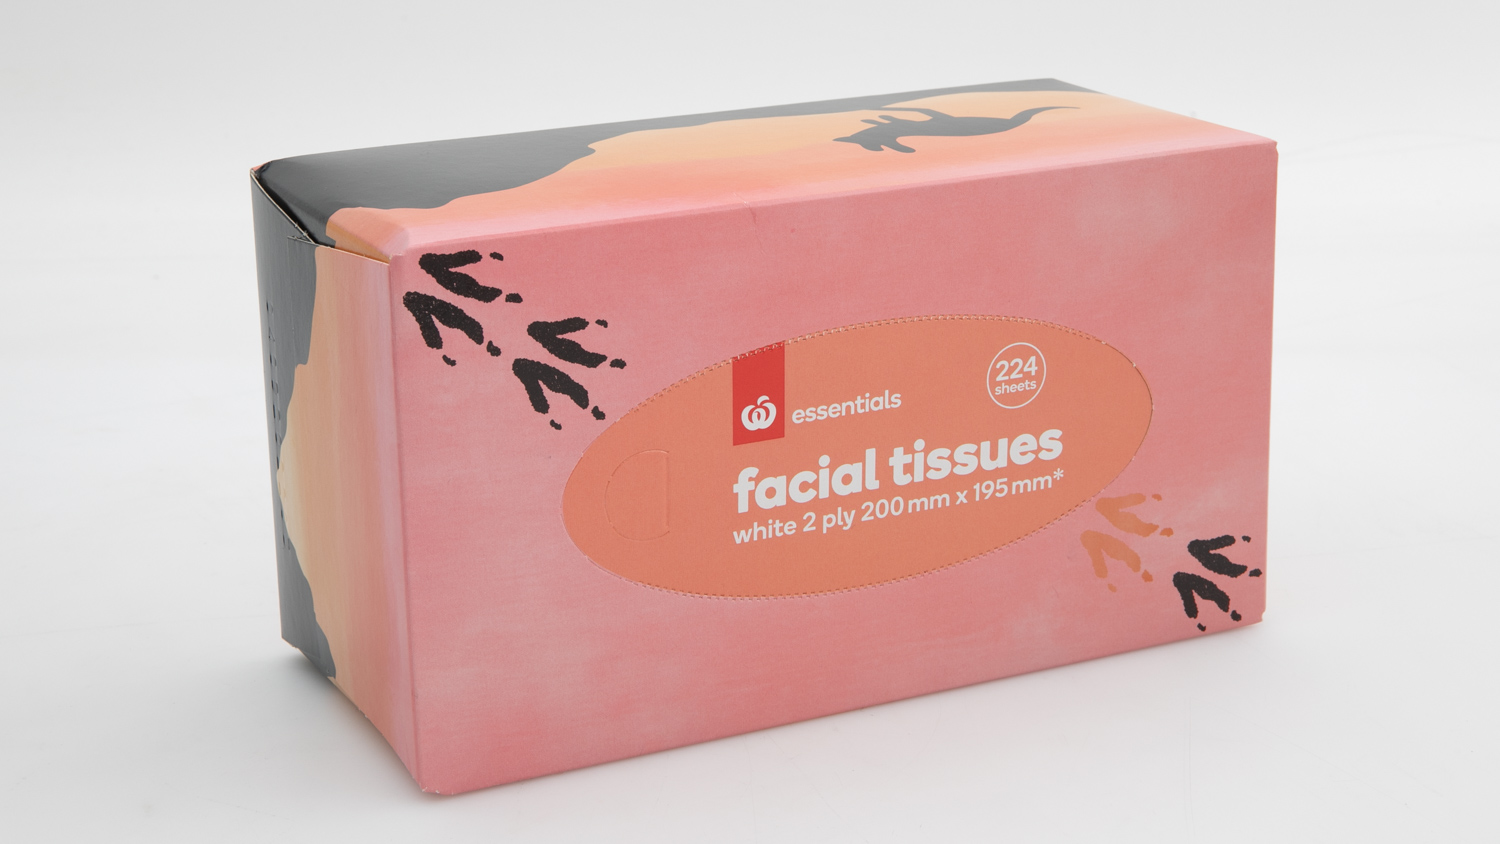 Woolworths Essentials 2 ply Facial Tissues 224 sheets carousel image